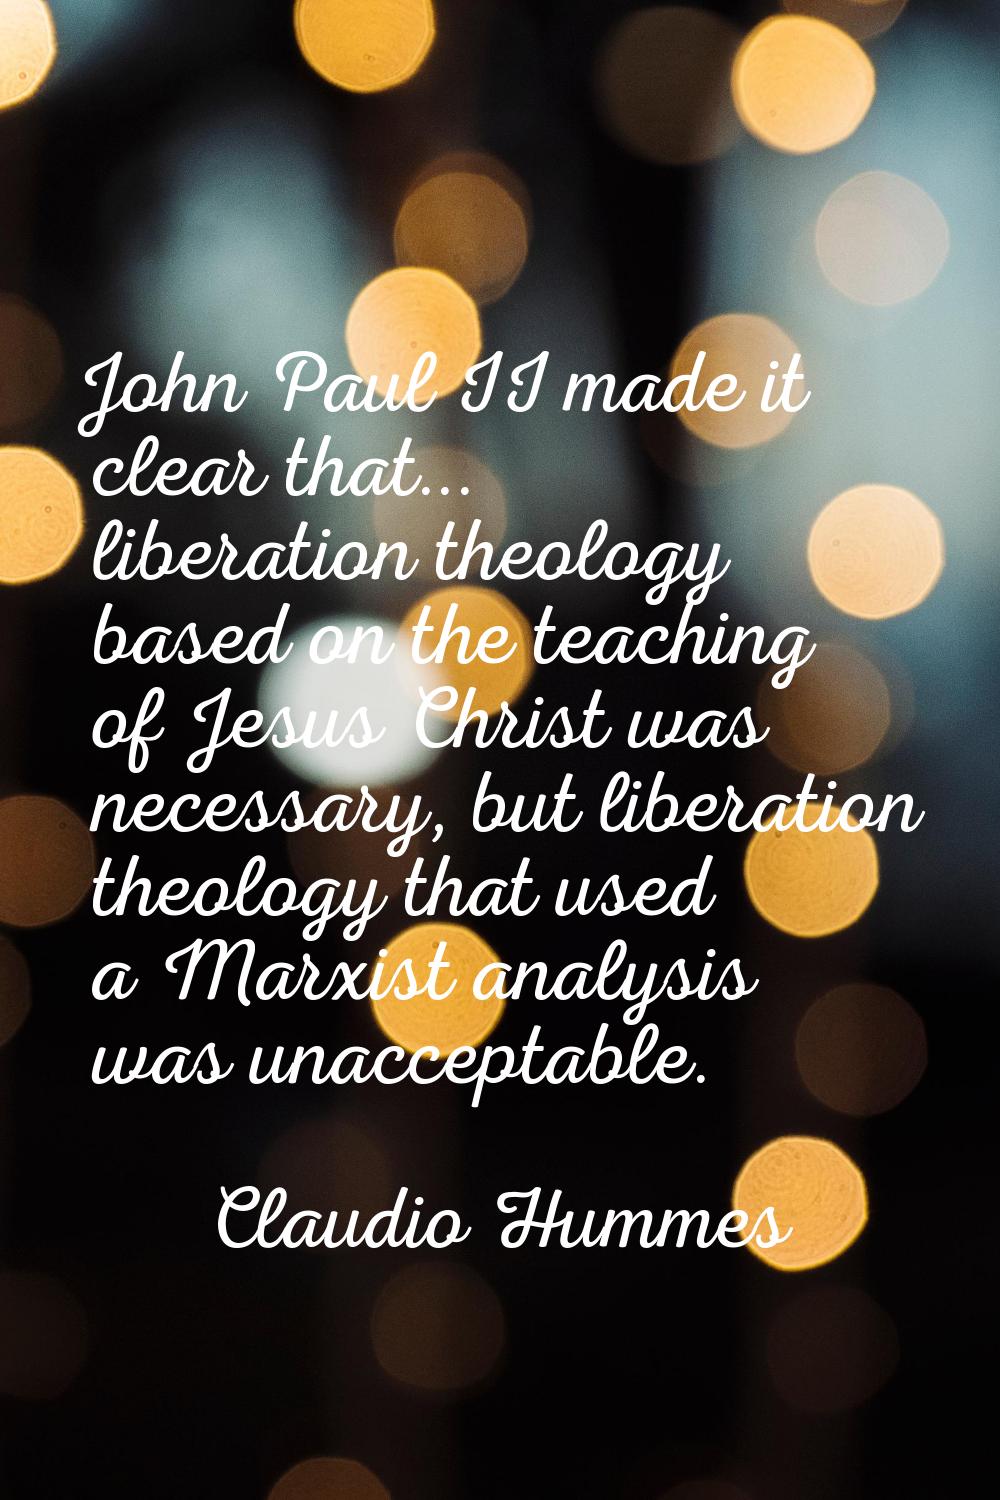 John Paul II made it clear that... liberation theology based on the teaching of Jesus Christ was ne